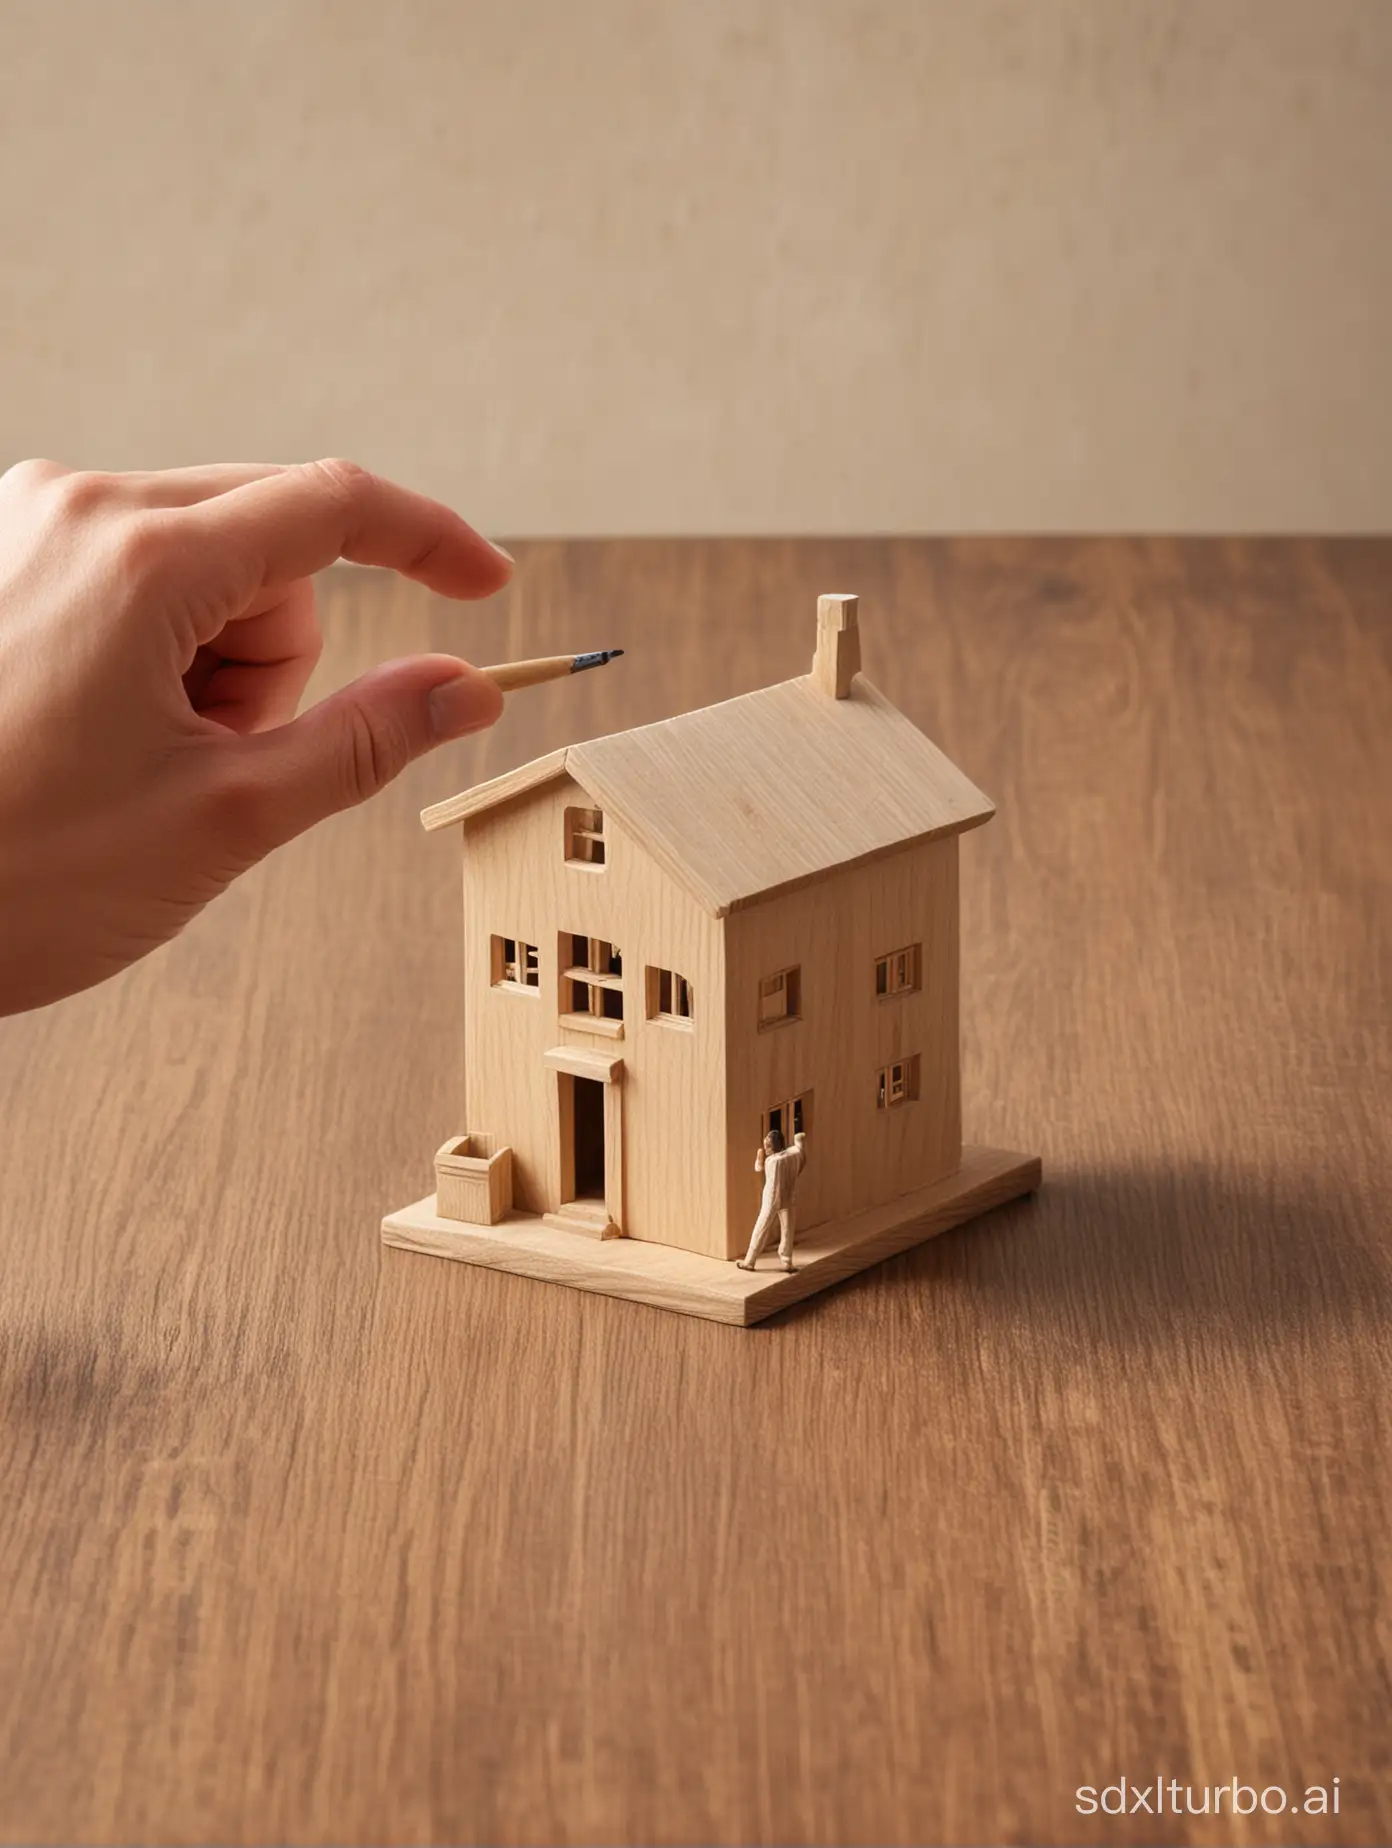 Finger-Pointing-at-Small-Wooden-House-on-Table